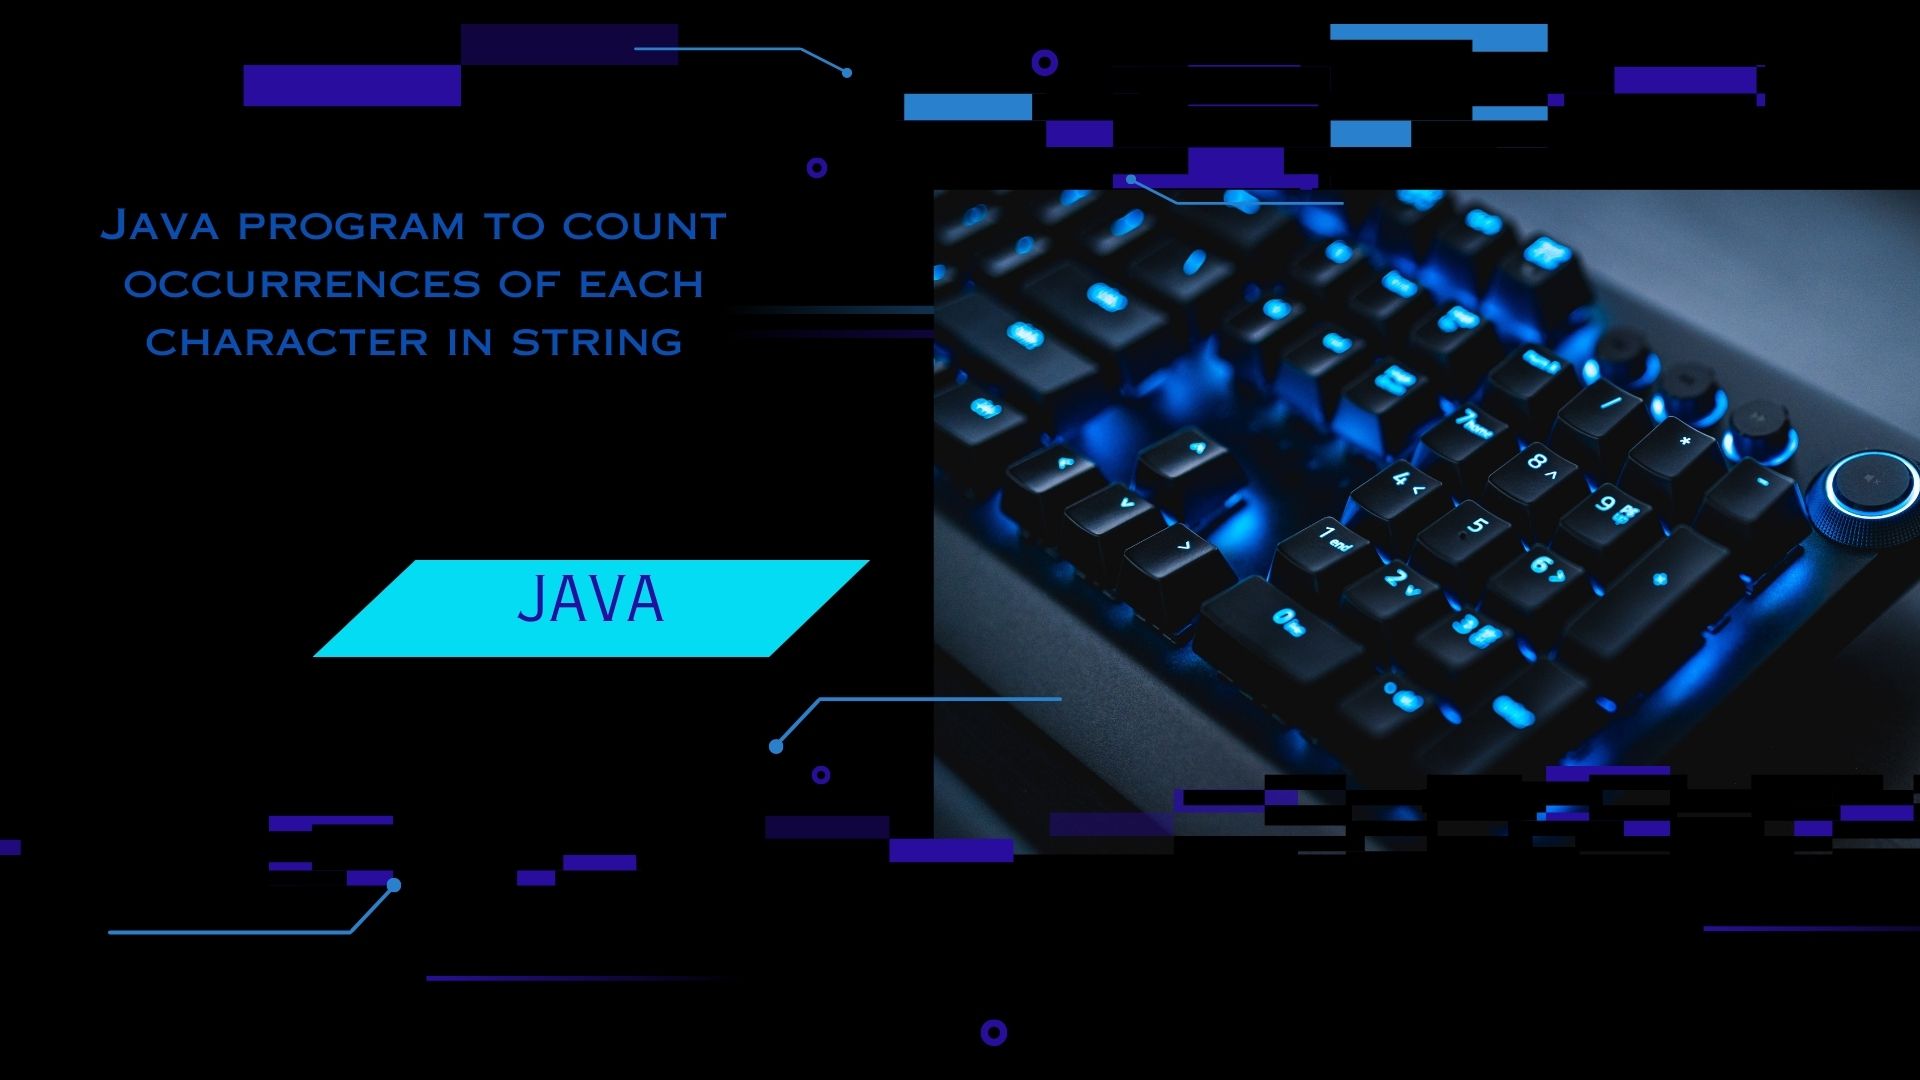 Count occurrences of each character in Java String